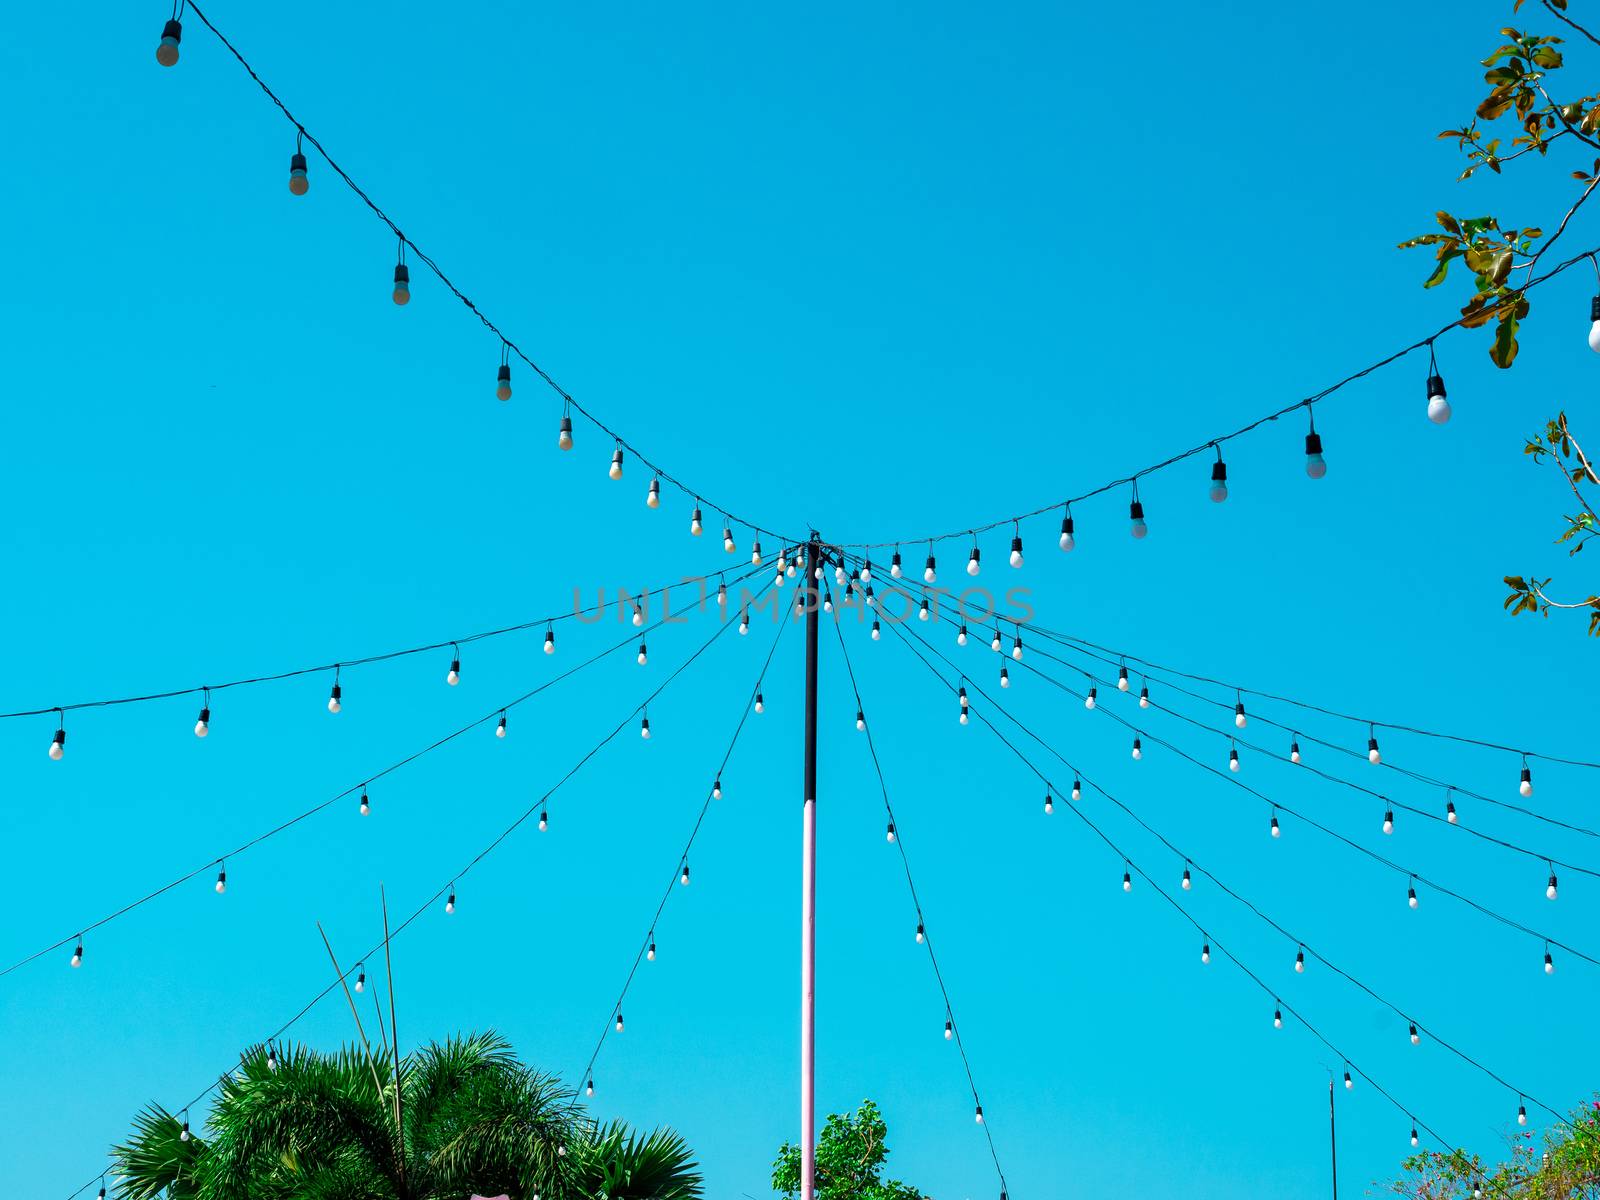 String wired bulbs from the pole in outdoor garden on blue sky background.